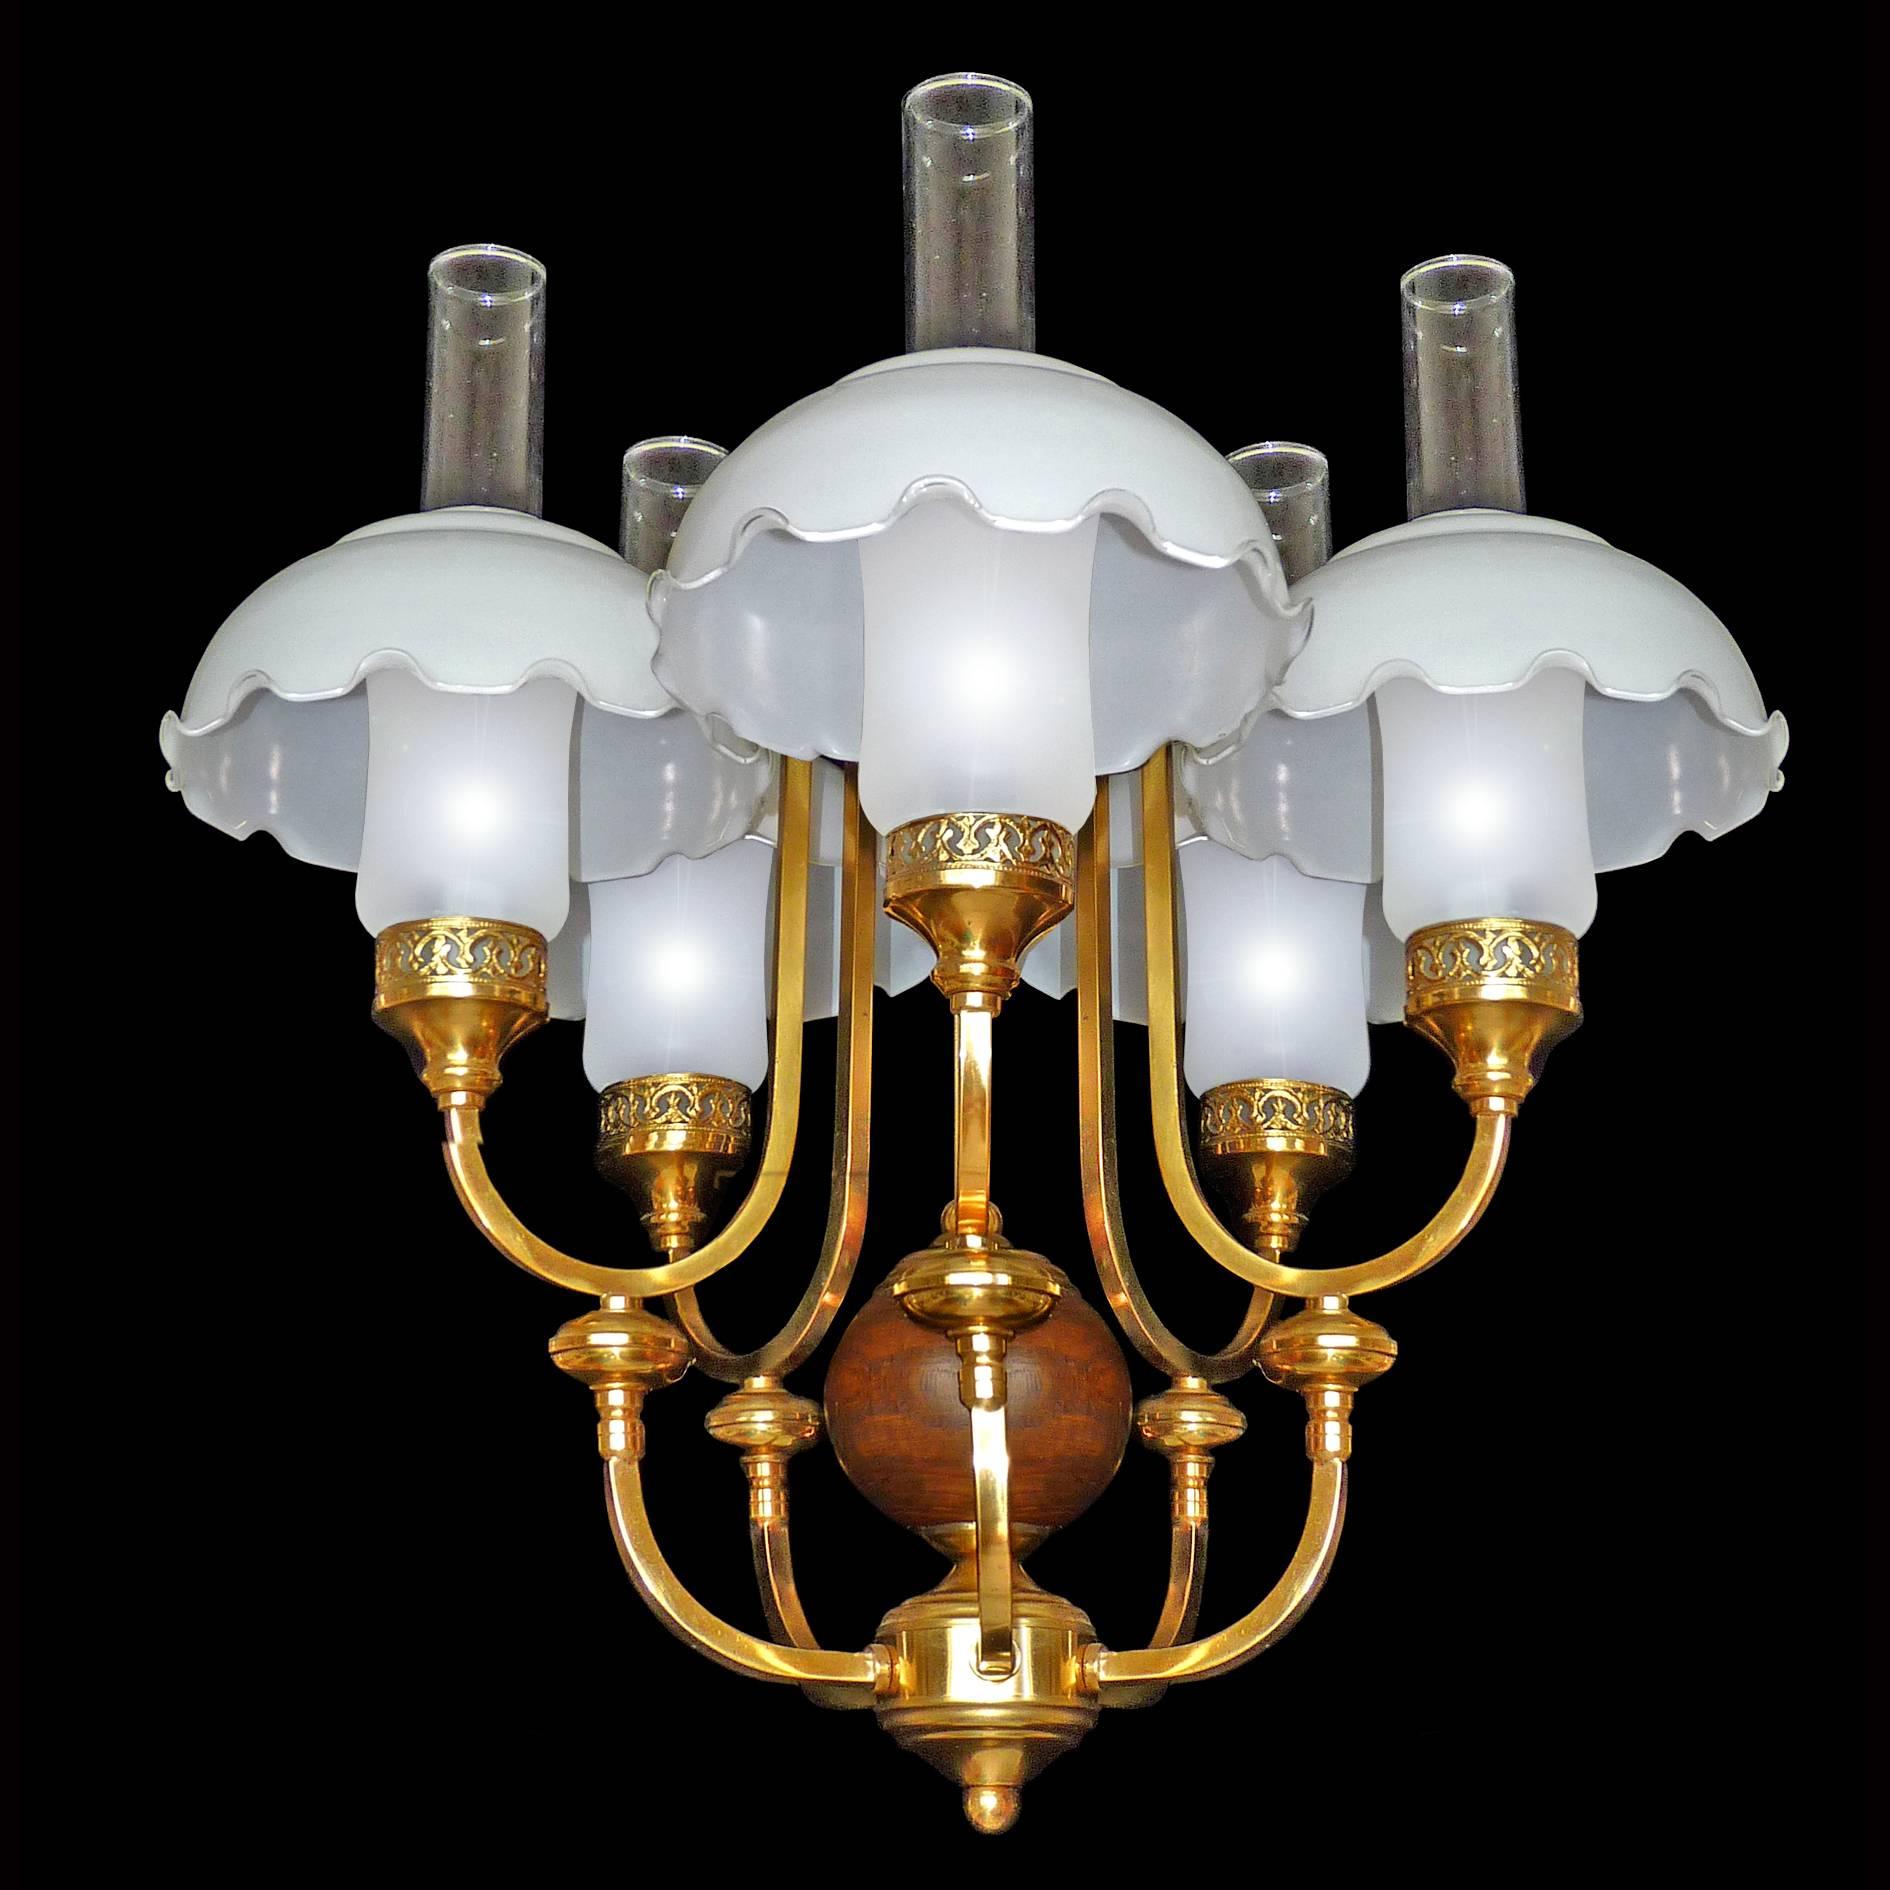 Gorgeous French Art Deco in Colonial style chandelier, gilt brass, wood and opaline glass shades
Measures:
Diameter 24 in / 60 cm
Height 36 in (20 in +12 in/chain) / 90 cm (60 cm + 30 cm/chain)
Glass shades 8 in /21 cm
Five light bulbs E14
Good